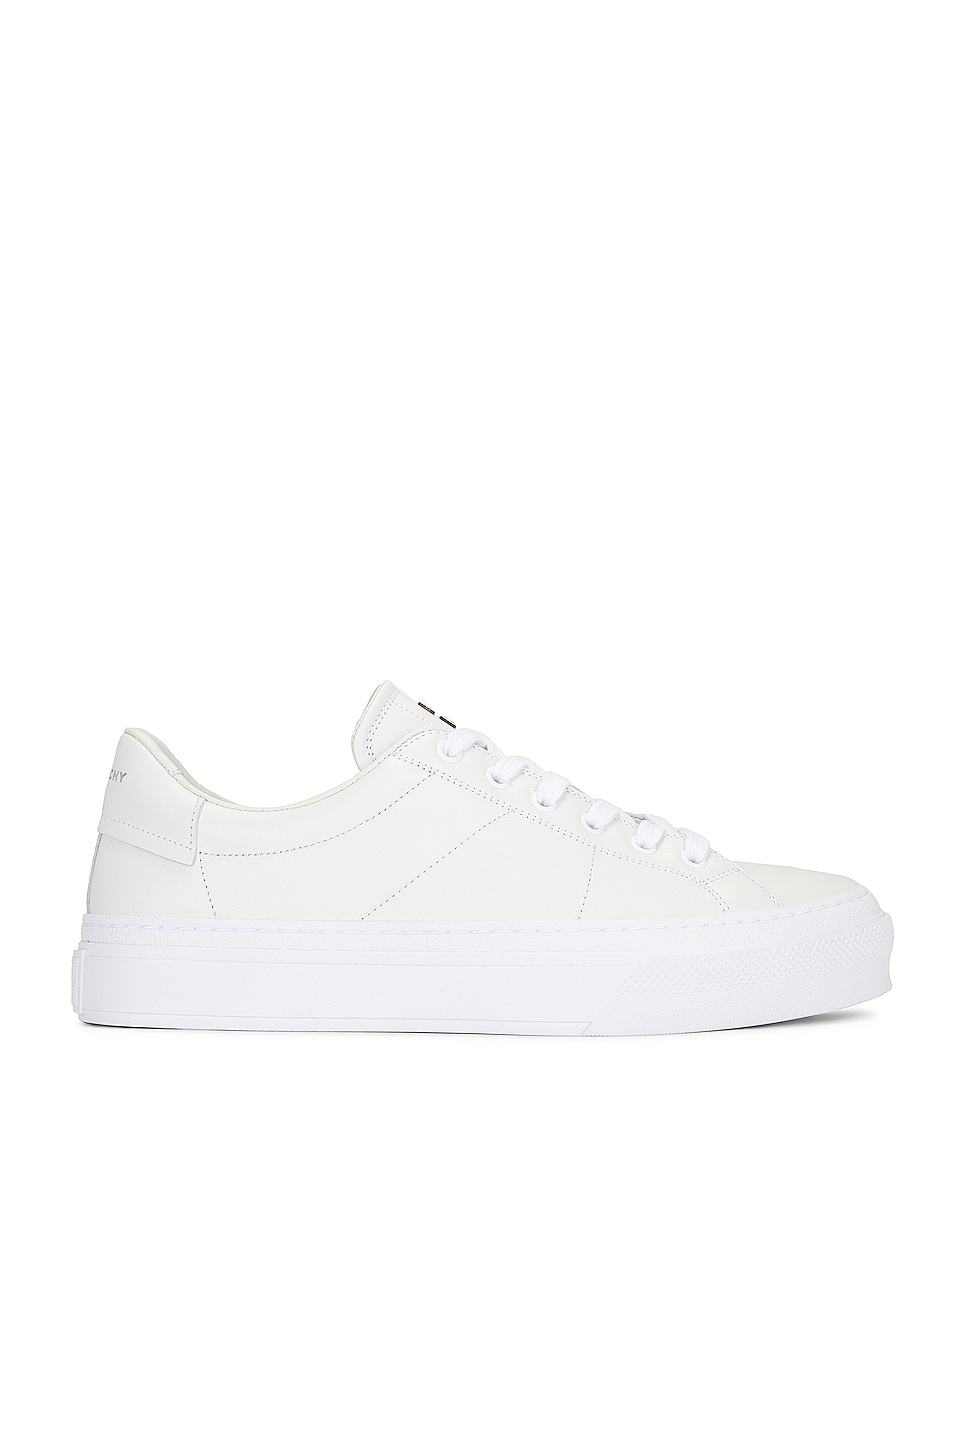 City Sport Lace Up Sneaker in White